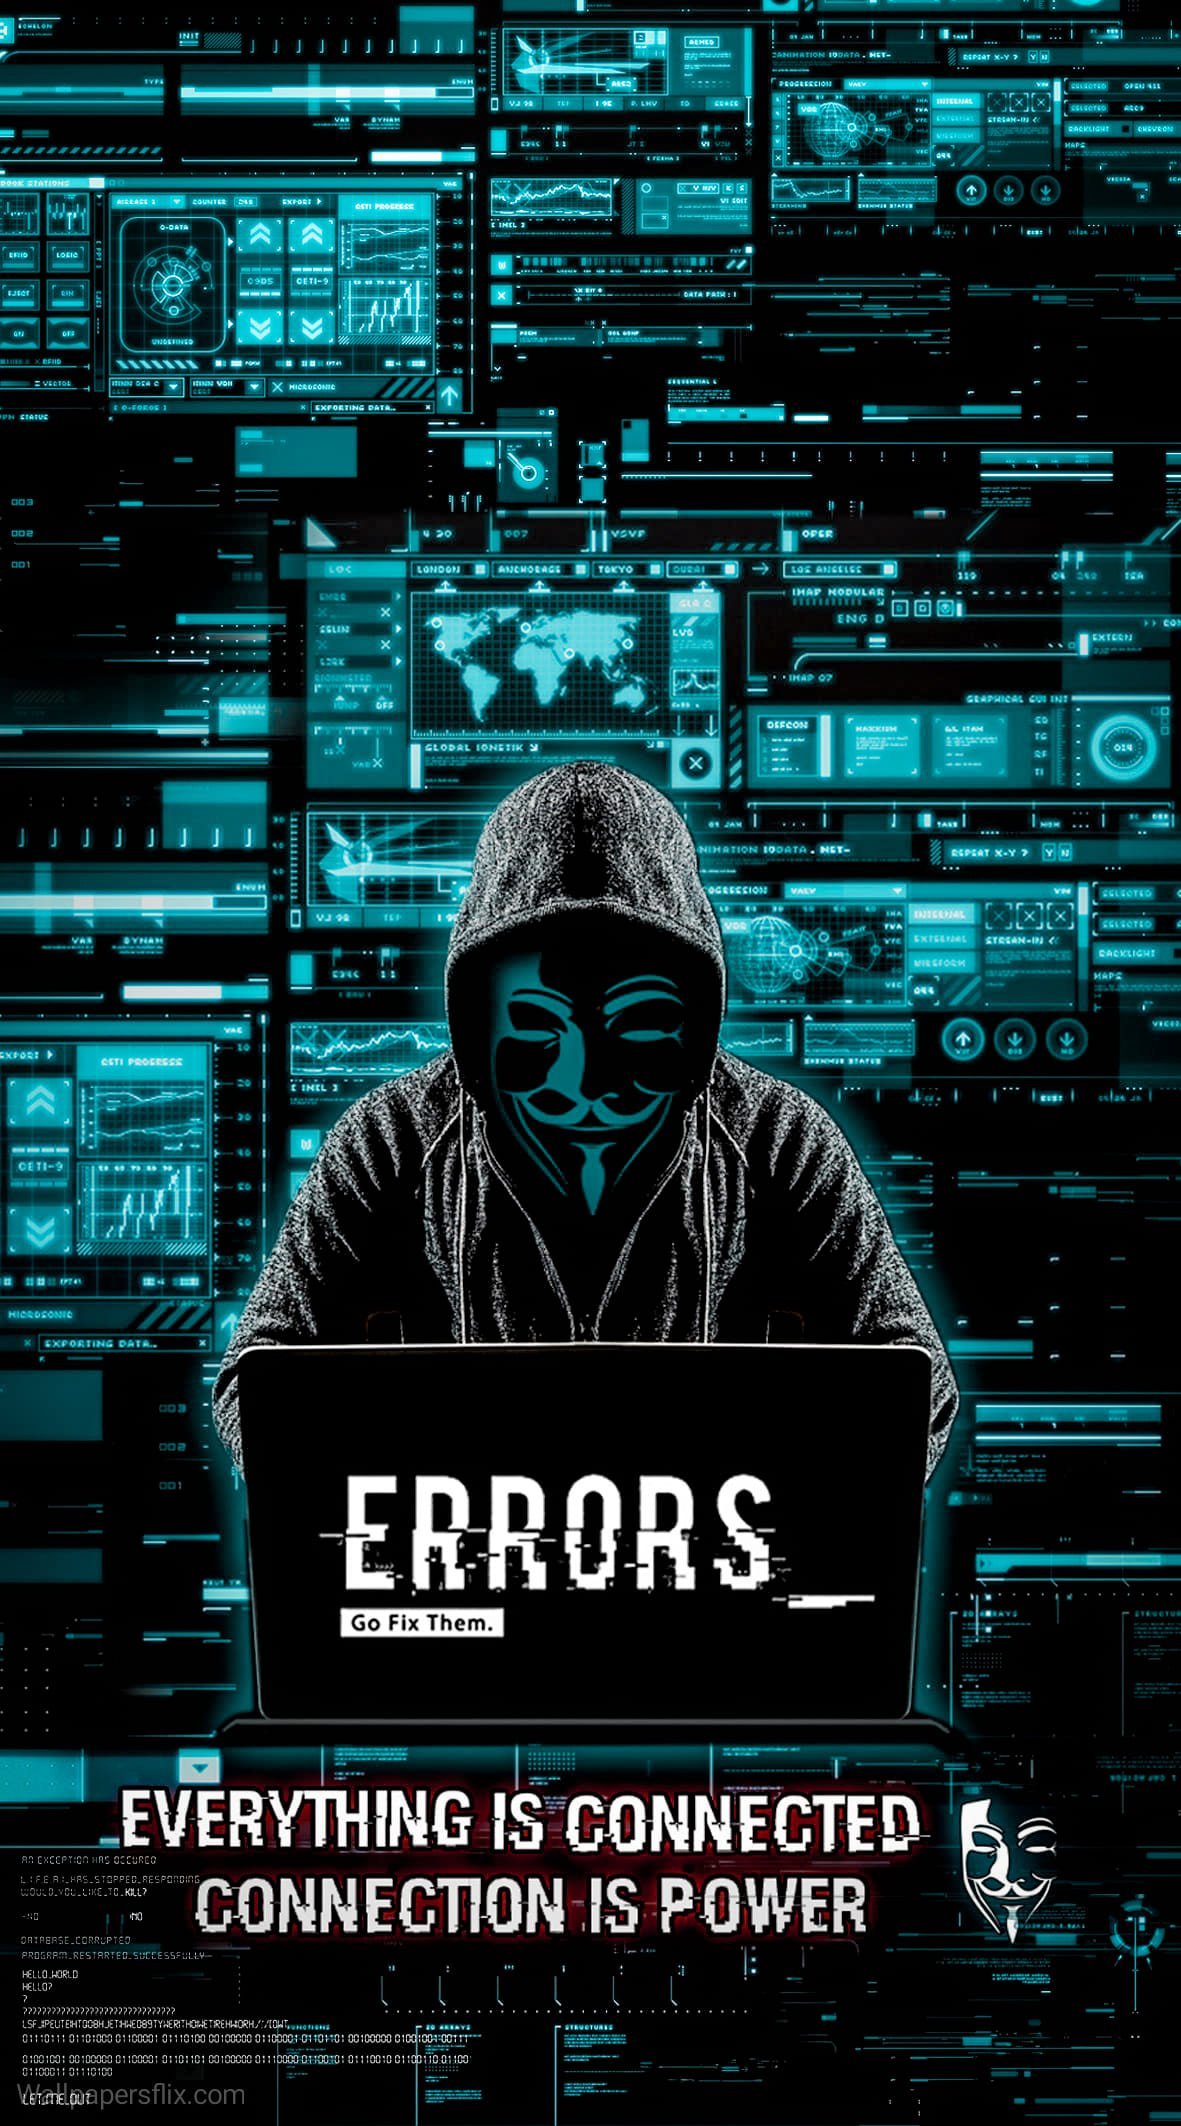 ethical Hacking [007]